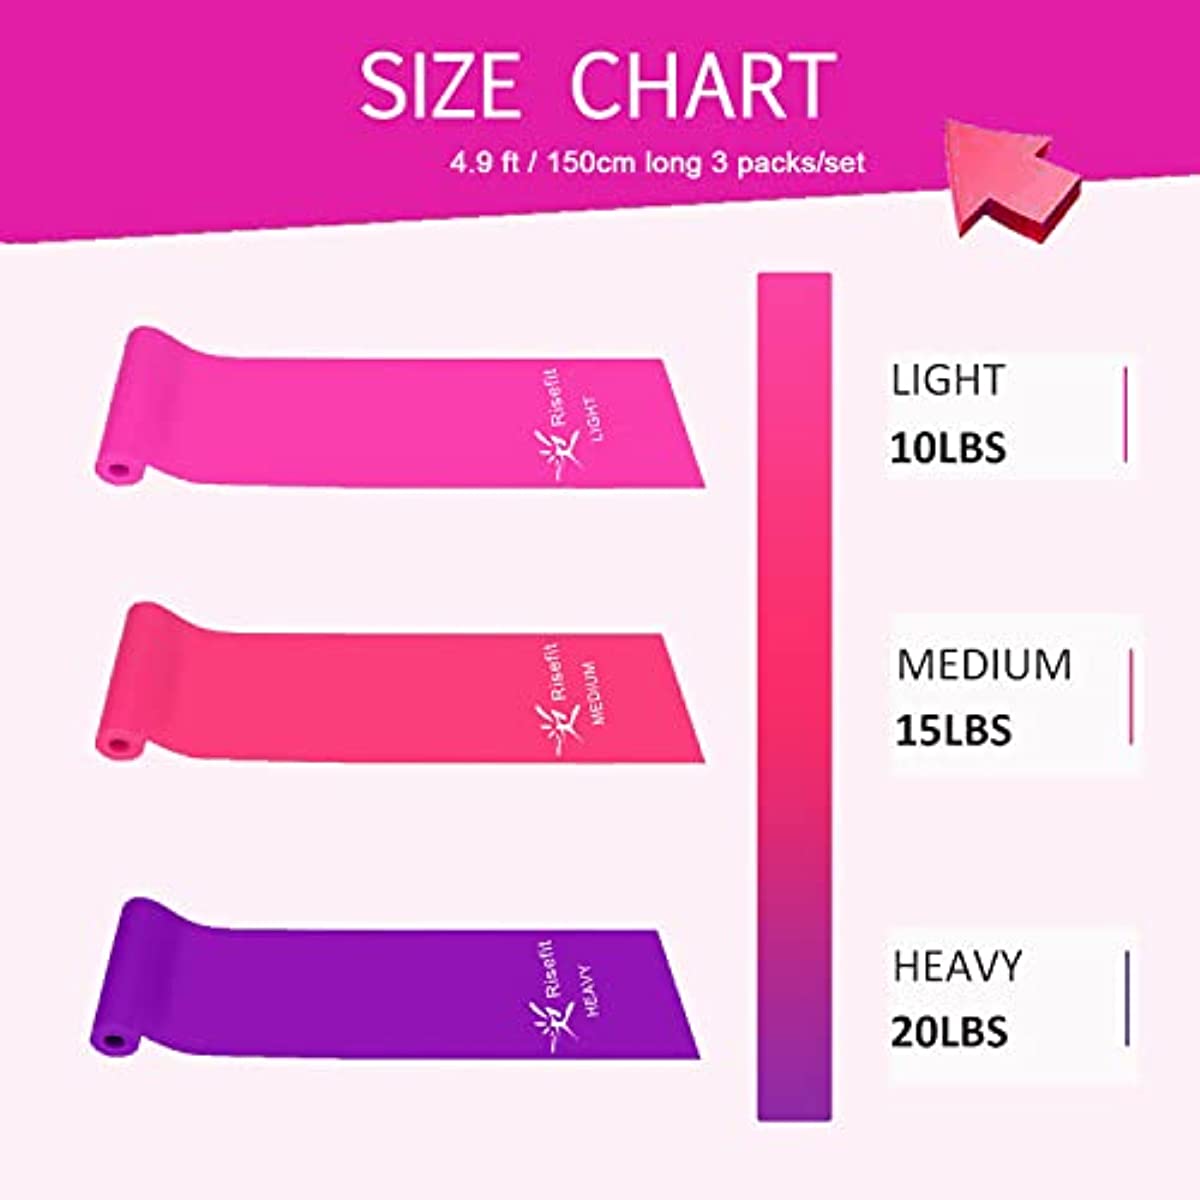 Risefit Resistance Bands Set 3PCs 5FT Long Latex Free Purple Stretch Bands for Working Out Therapy Exercise theraband for Physical Therapy, Yoga Ballet Dance Pilates Rehab